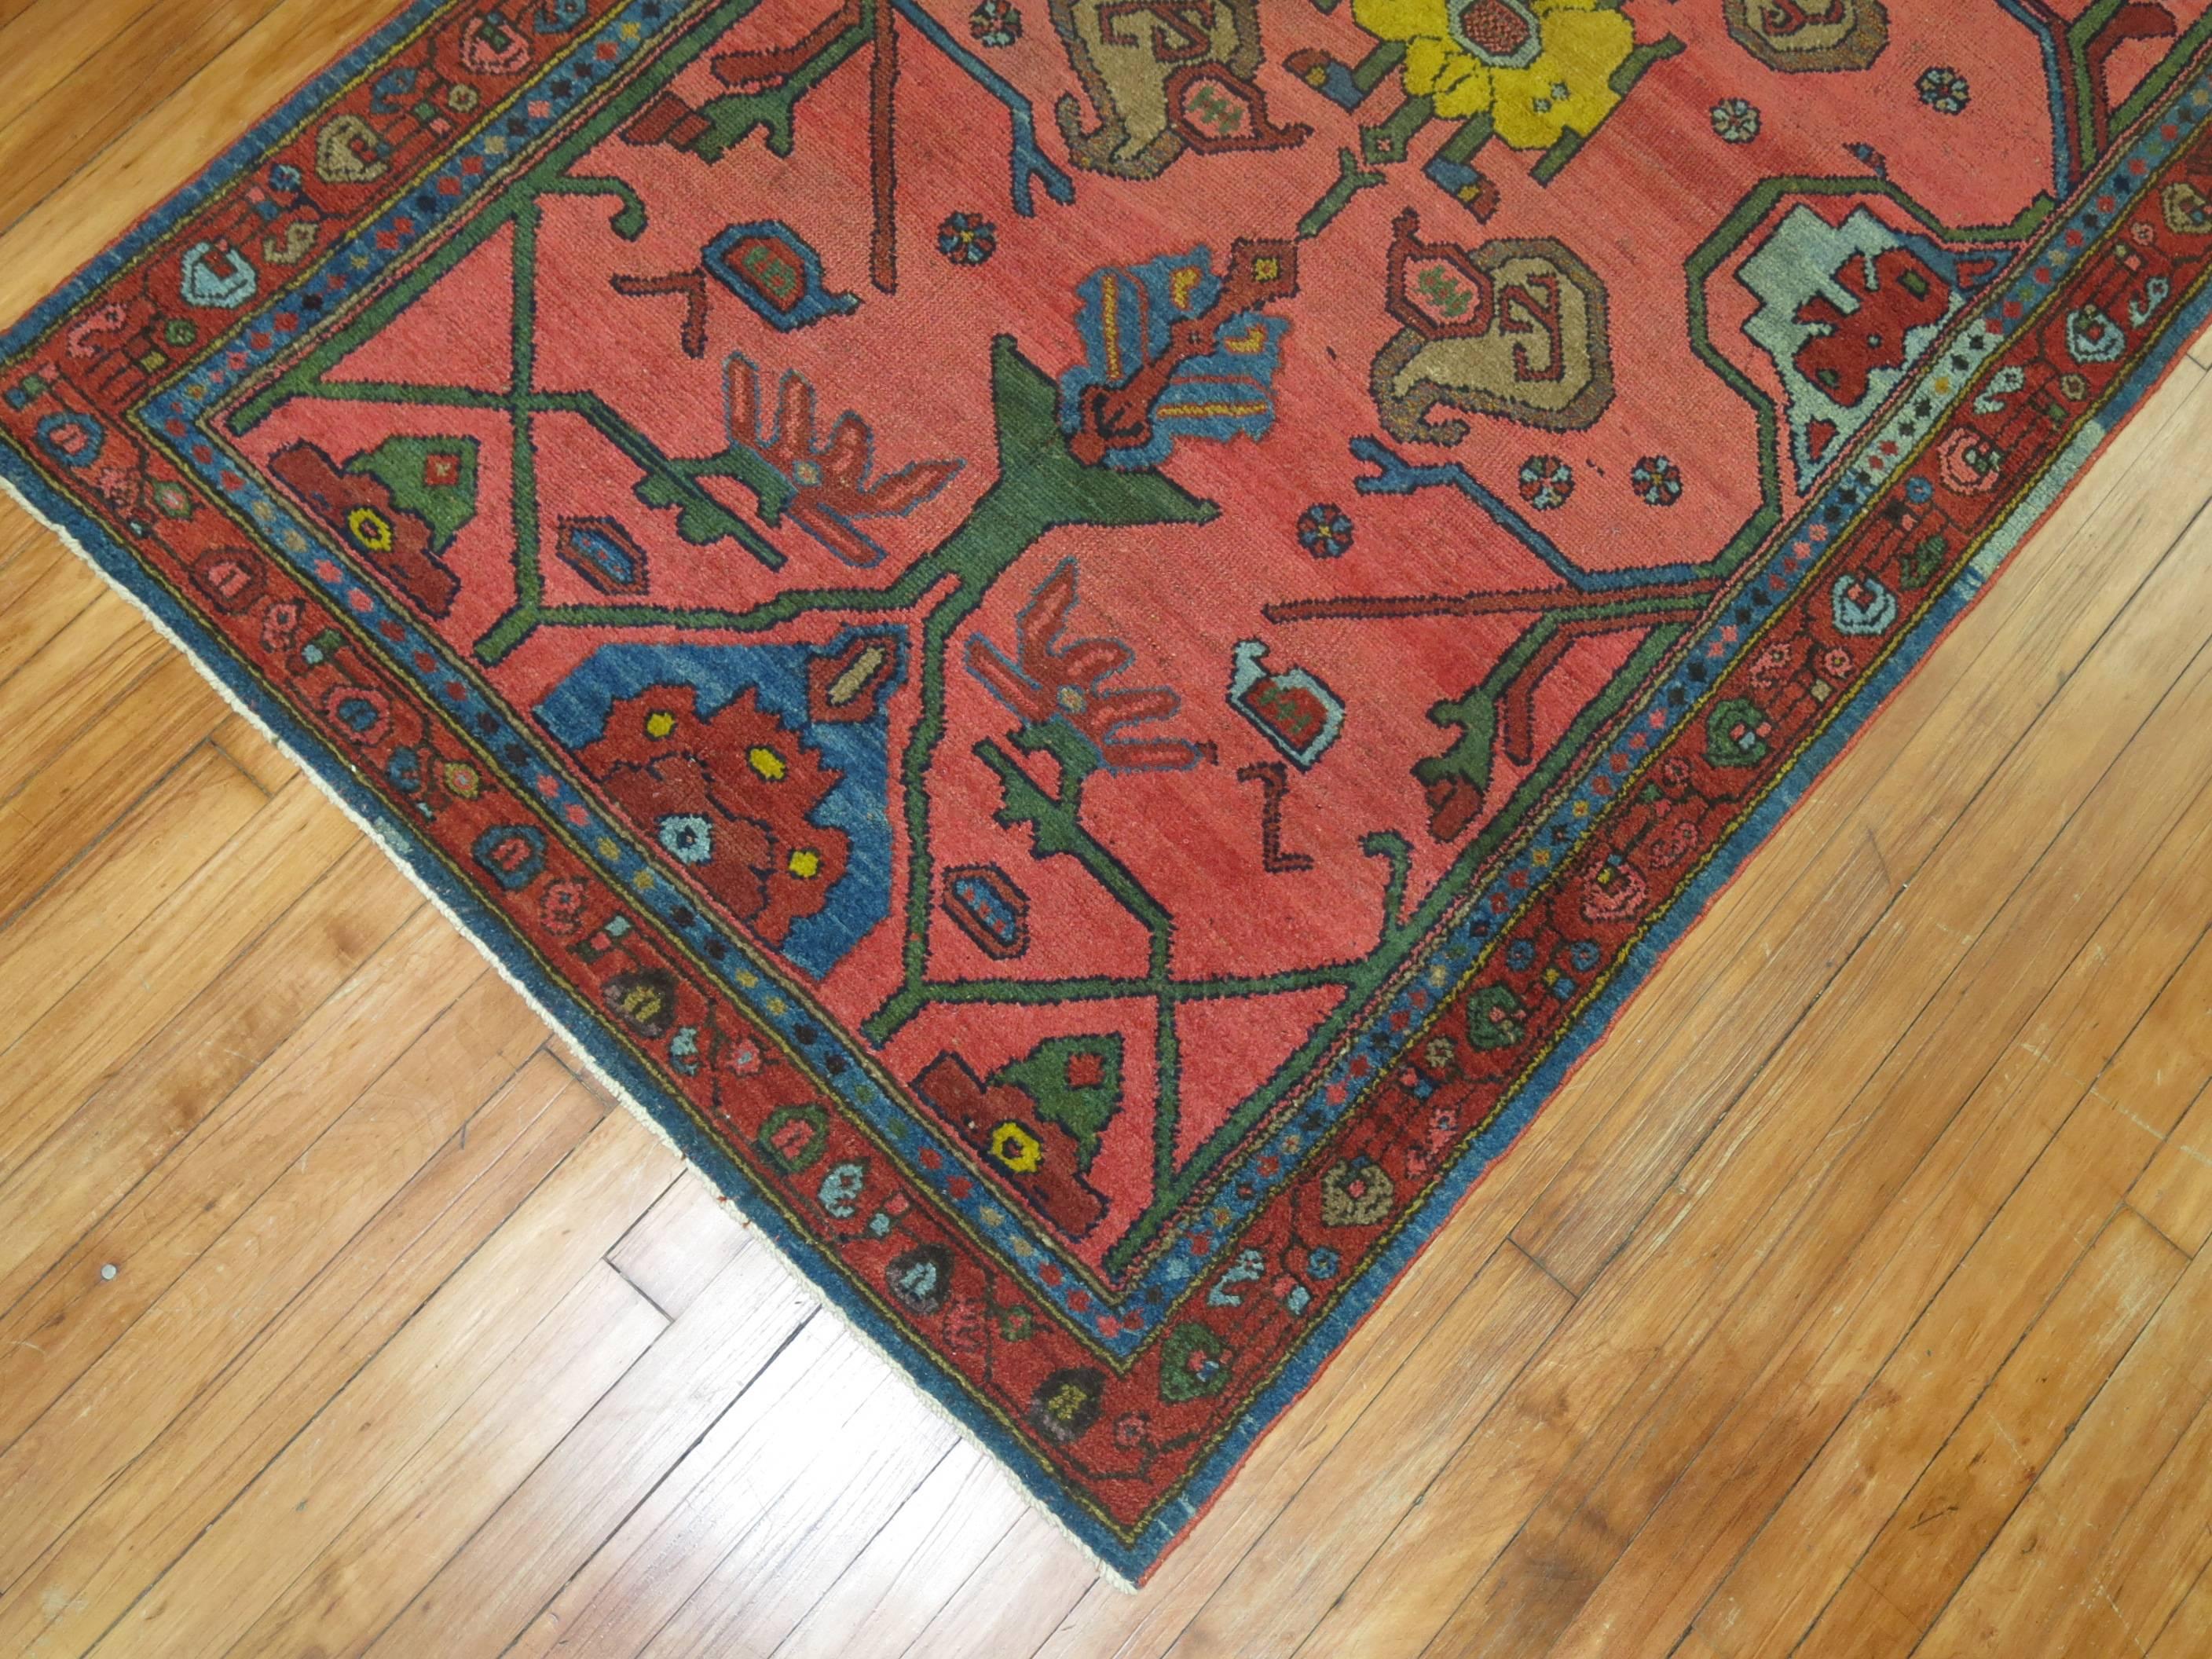 A colorful circa 1930 Persian rug from central Persia with blue, green, brown and yellow accents 

Measures: 3'6'' x 6'4''.